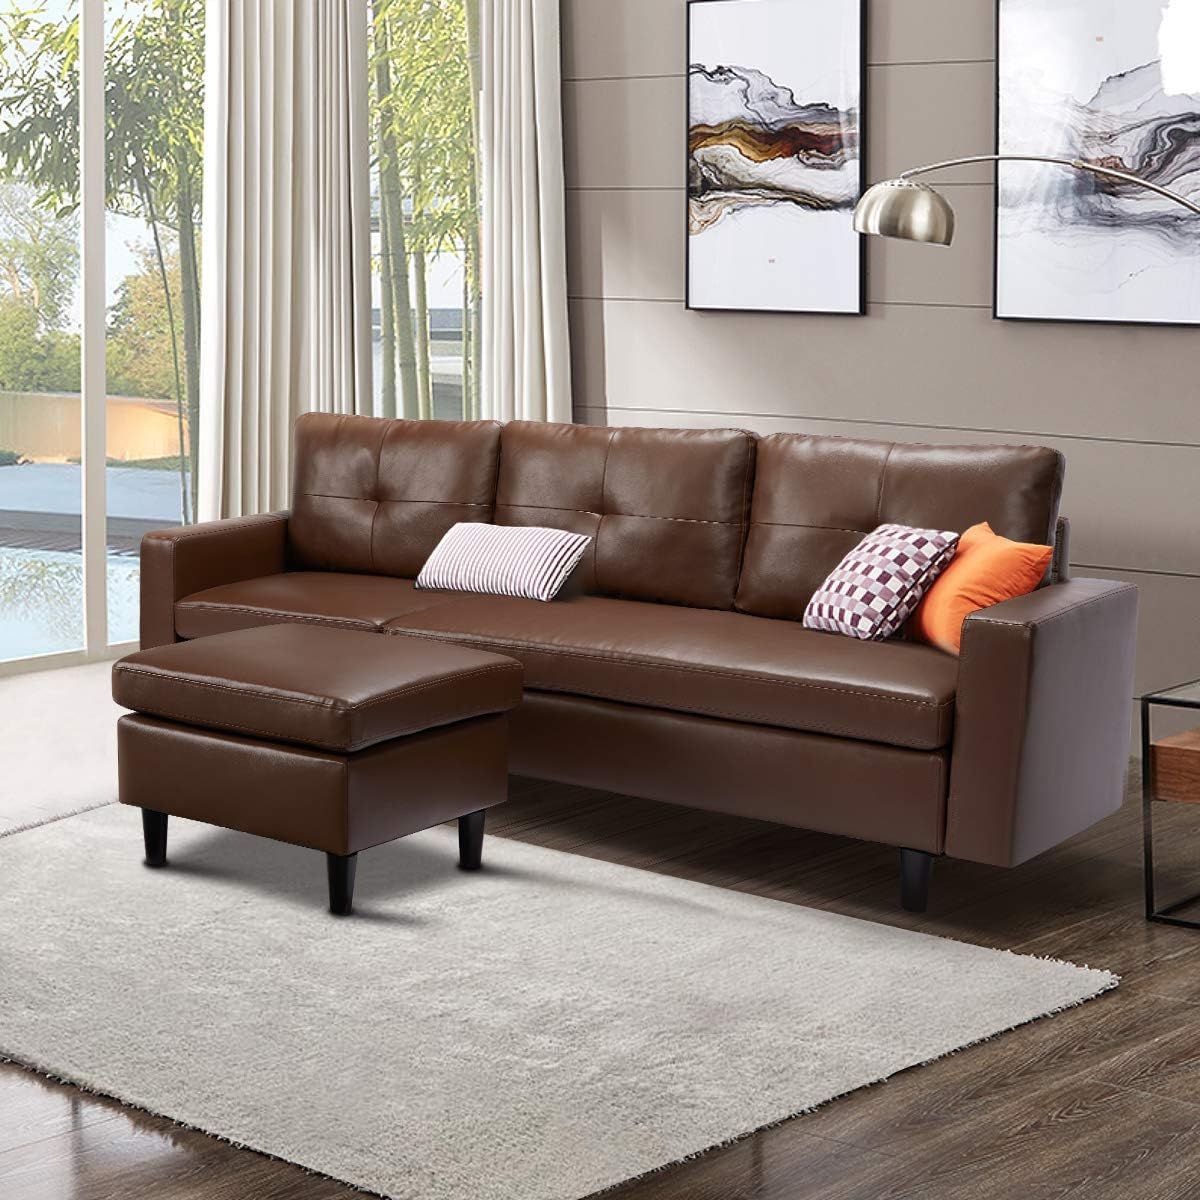 Newest Faux Leather Sofas In Chocolate Brown With Regard To Esright Faux Leather Sectional Sofa Convertible Couch Brown Leather L (View 8 of 15)